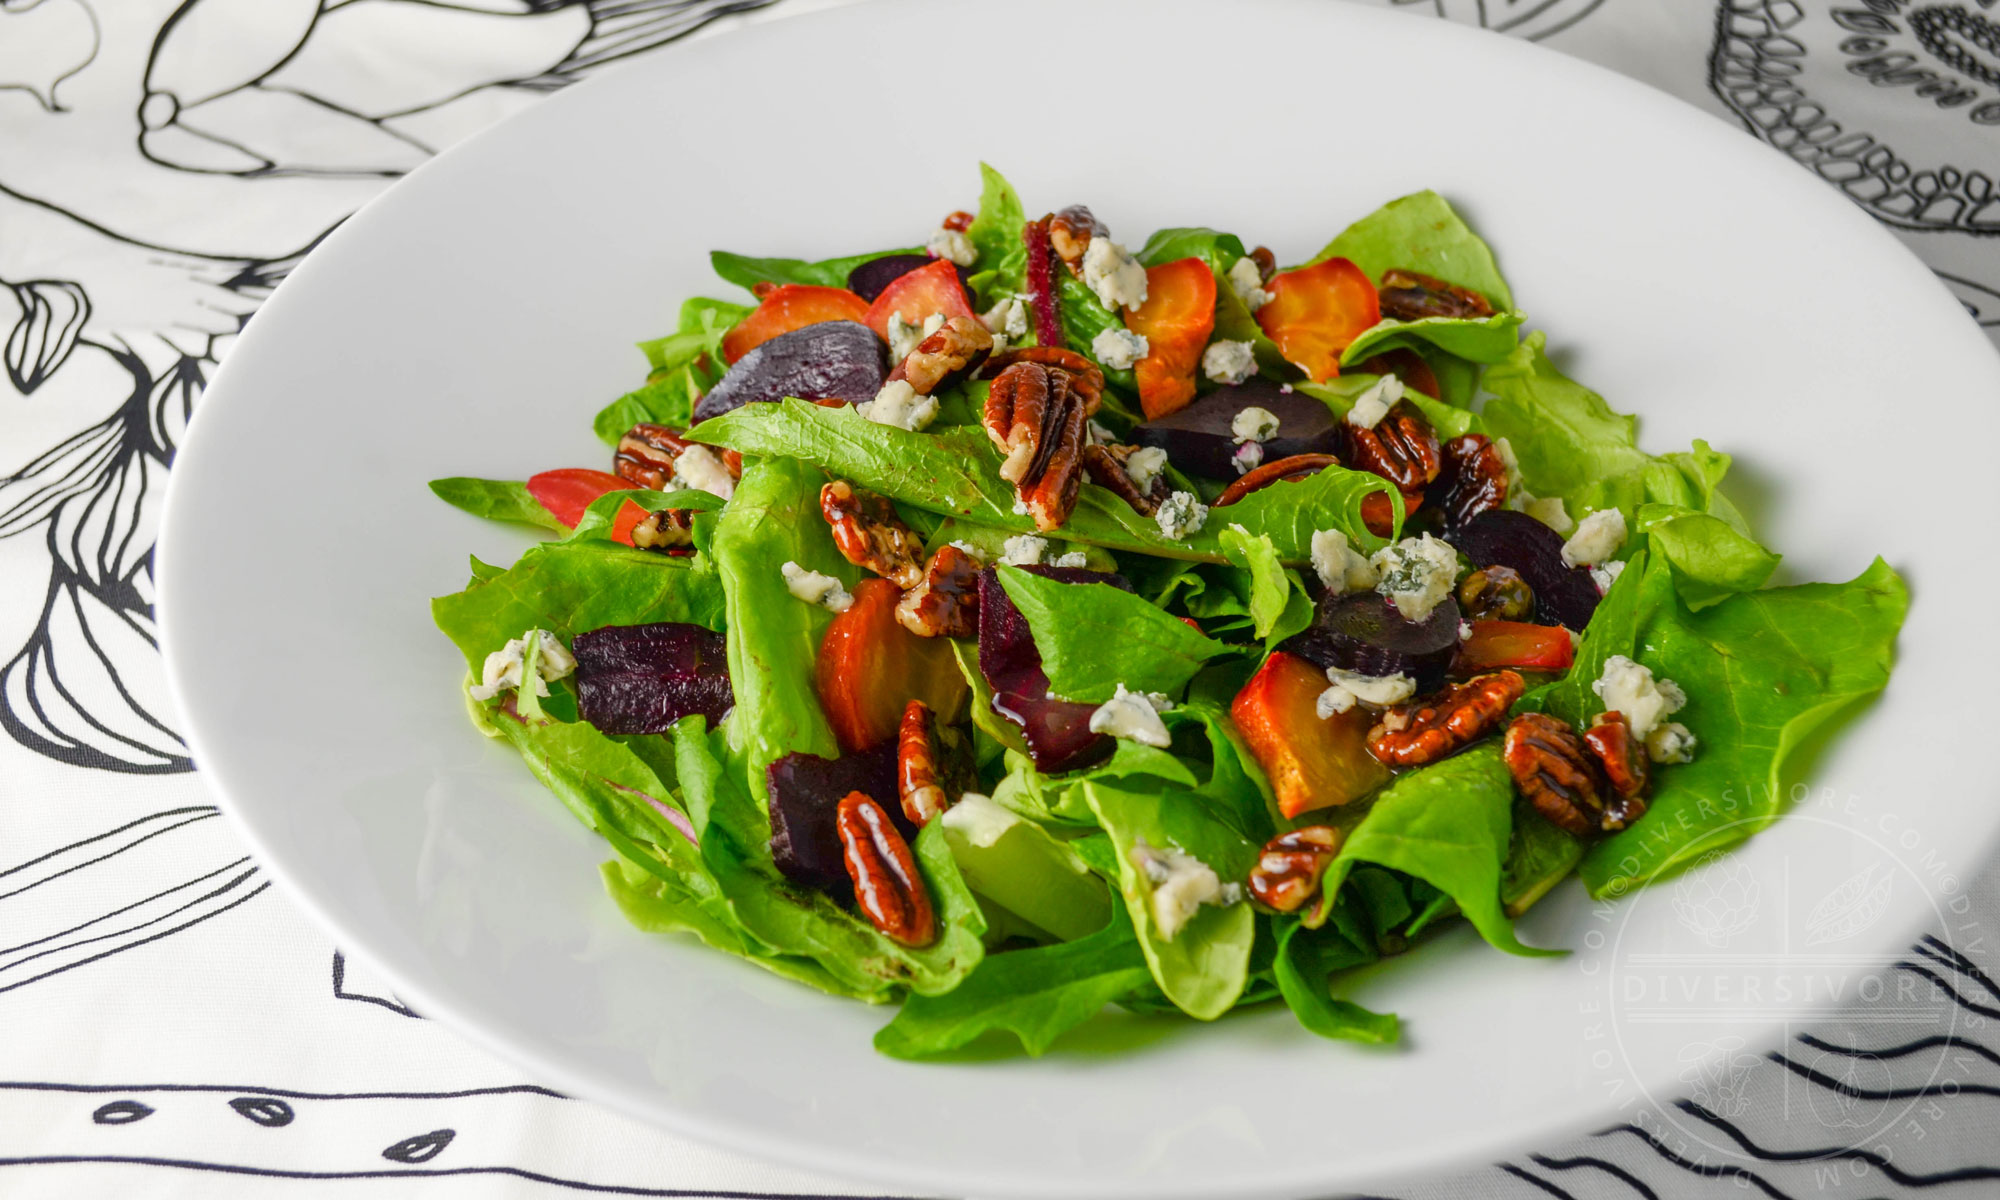 Featured image for “Dandelion Salad with Beets, Blue Cheese, & Maple Candied Pecans”